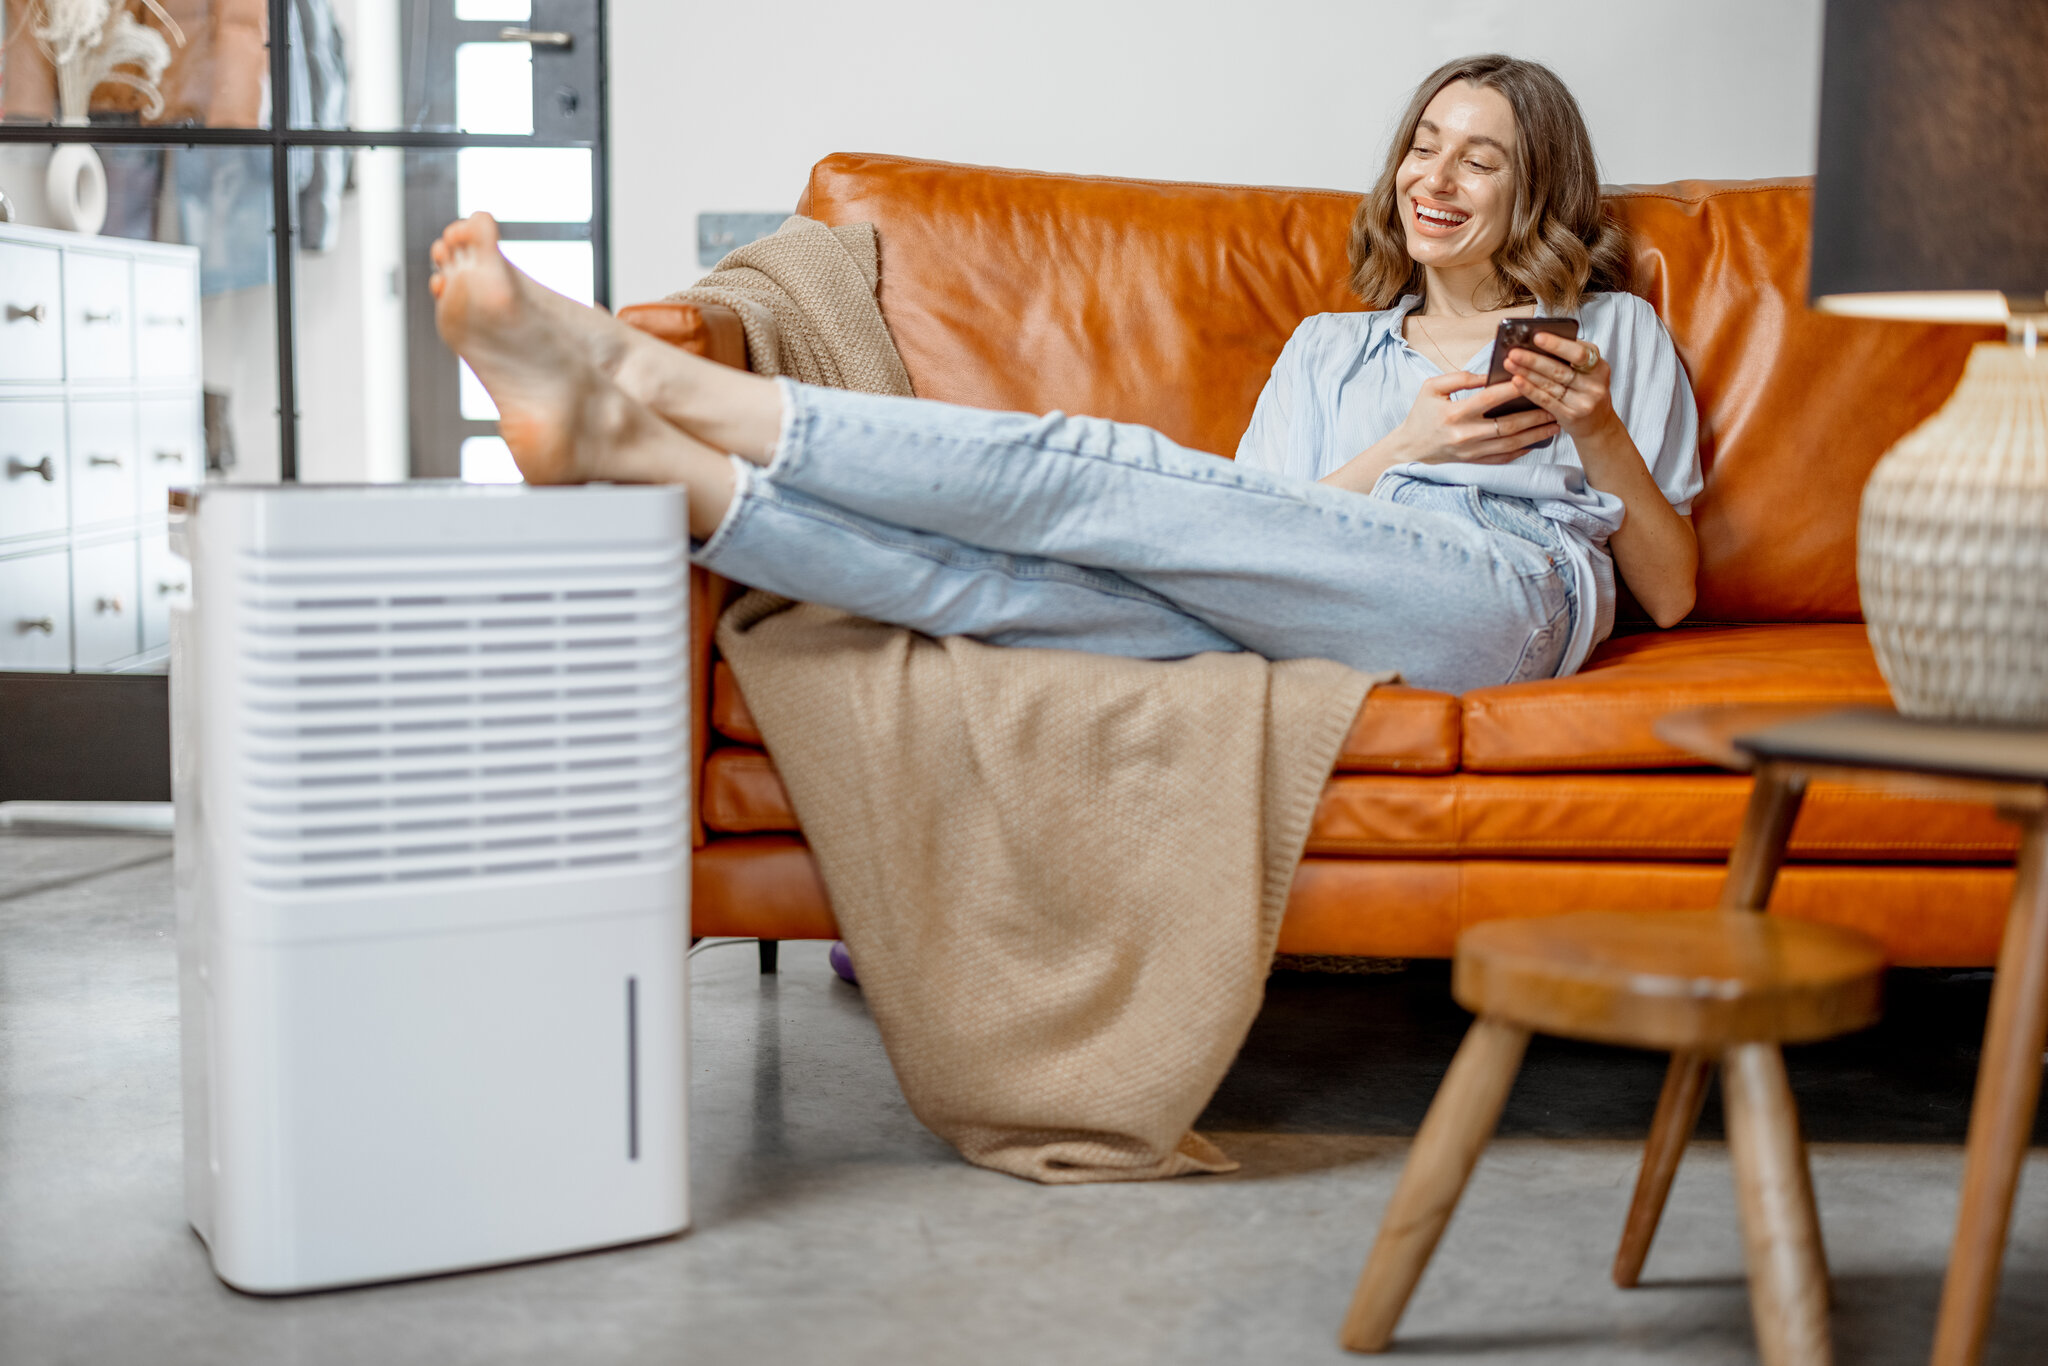 woman sitting next to air purifier